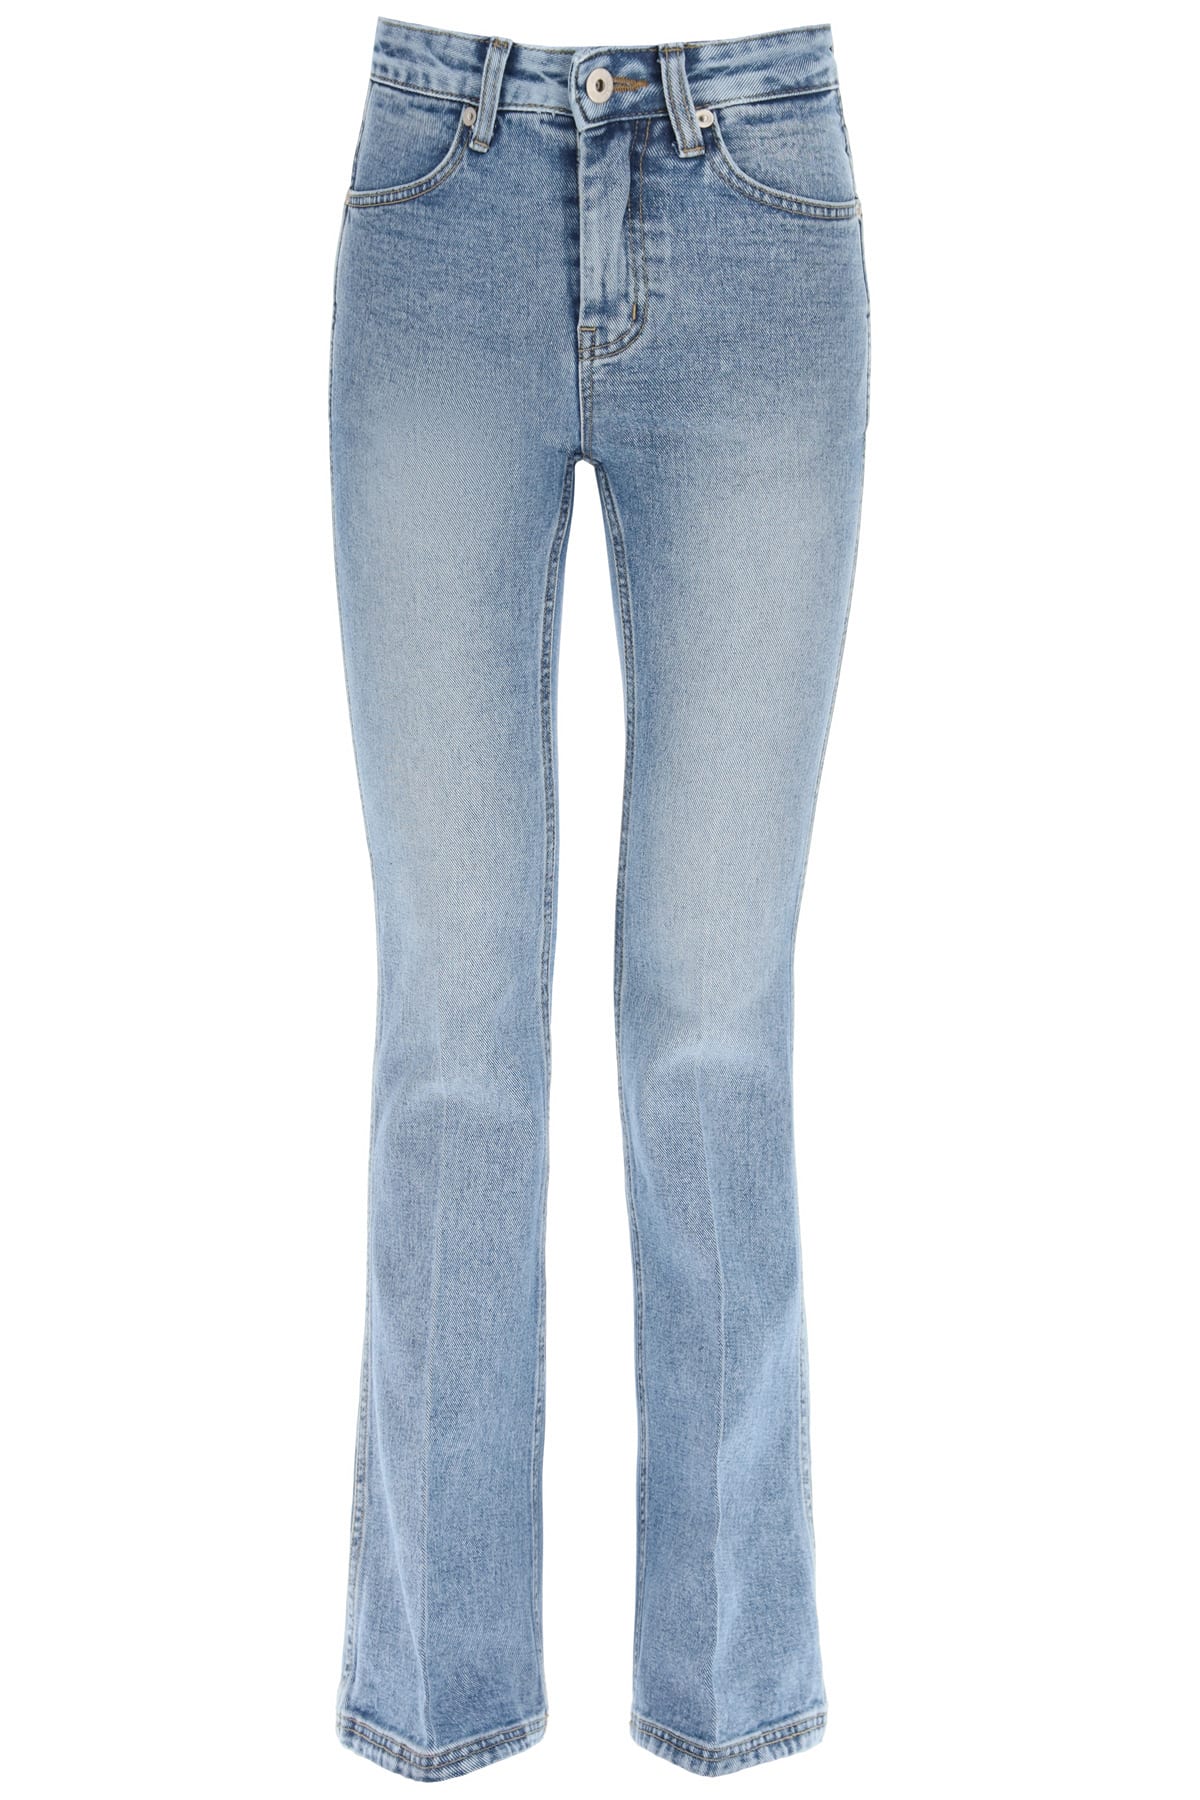 Low Classic Flared Slim Jeans